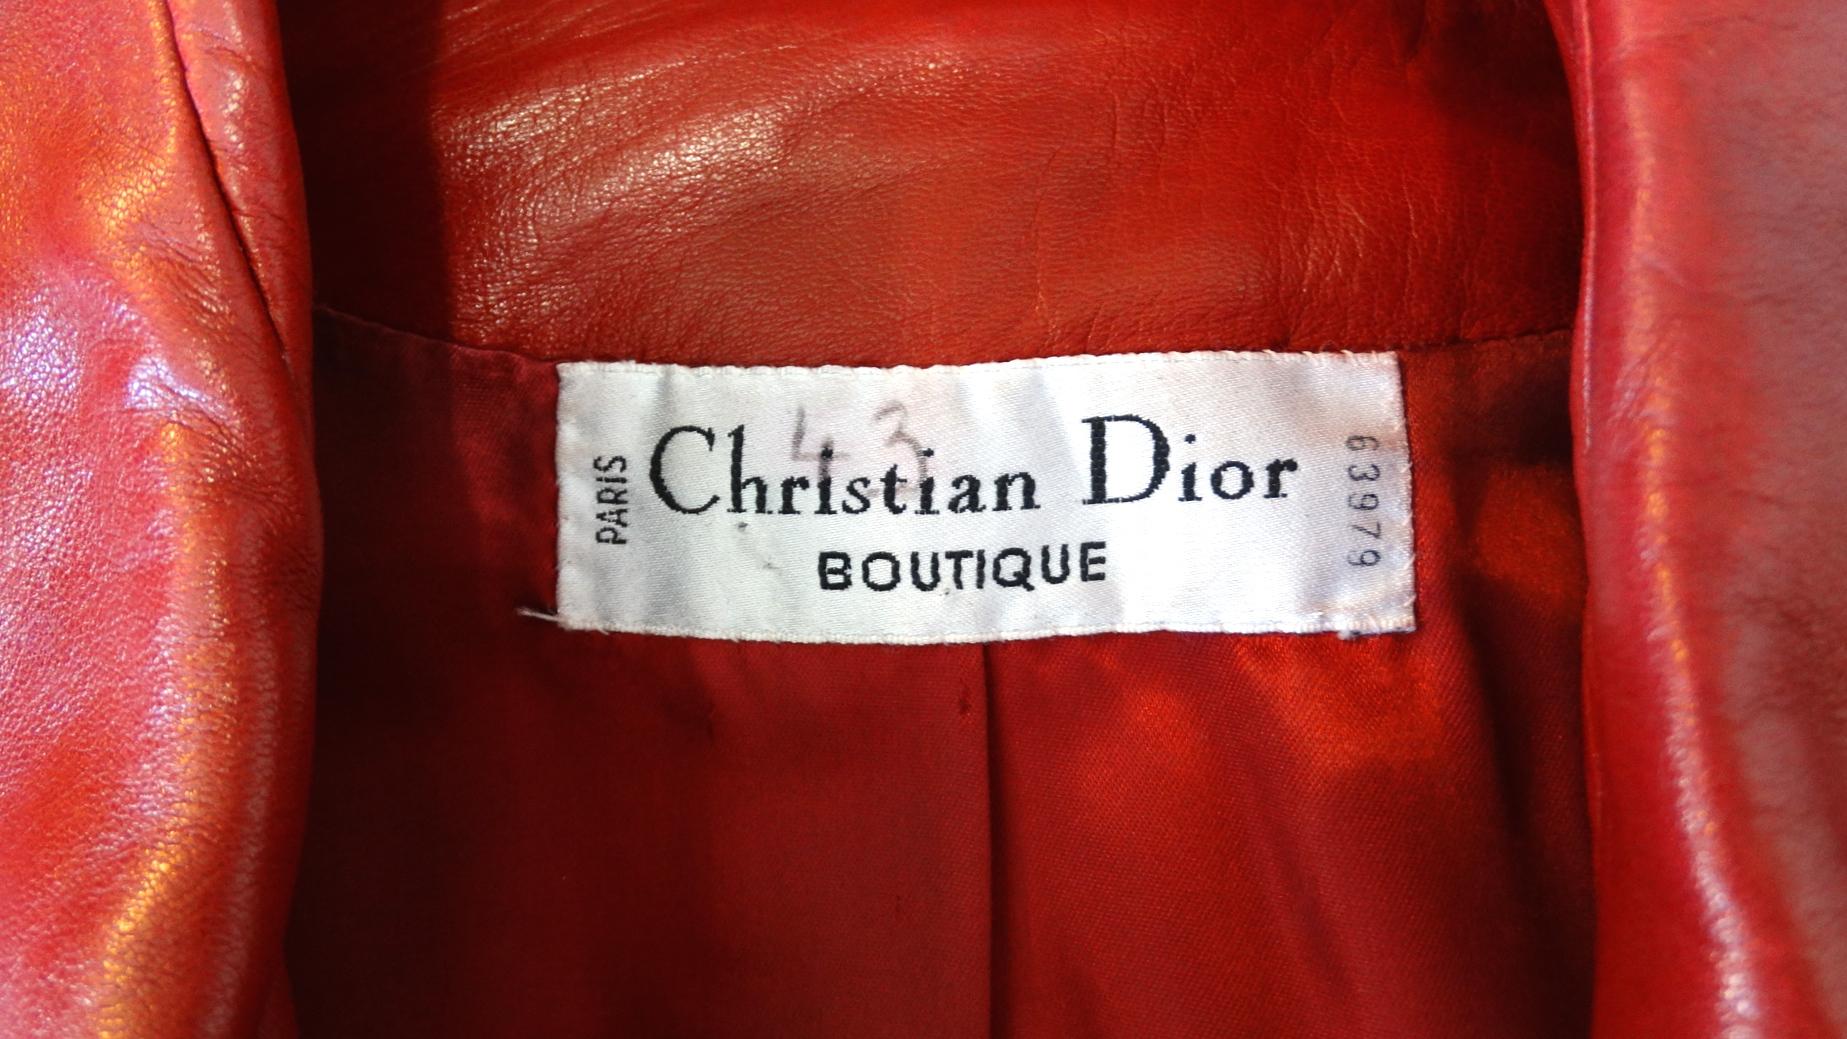 Your perfect piece for fall has arrived- with our luxurious red leather jacket from circa 1980s Christian Dior! Made of a soft, rich red leather and accented with contrasting, detailed leather trim on the pockets. Leather wrapped buttons up the